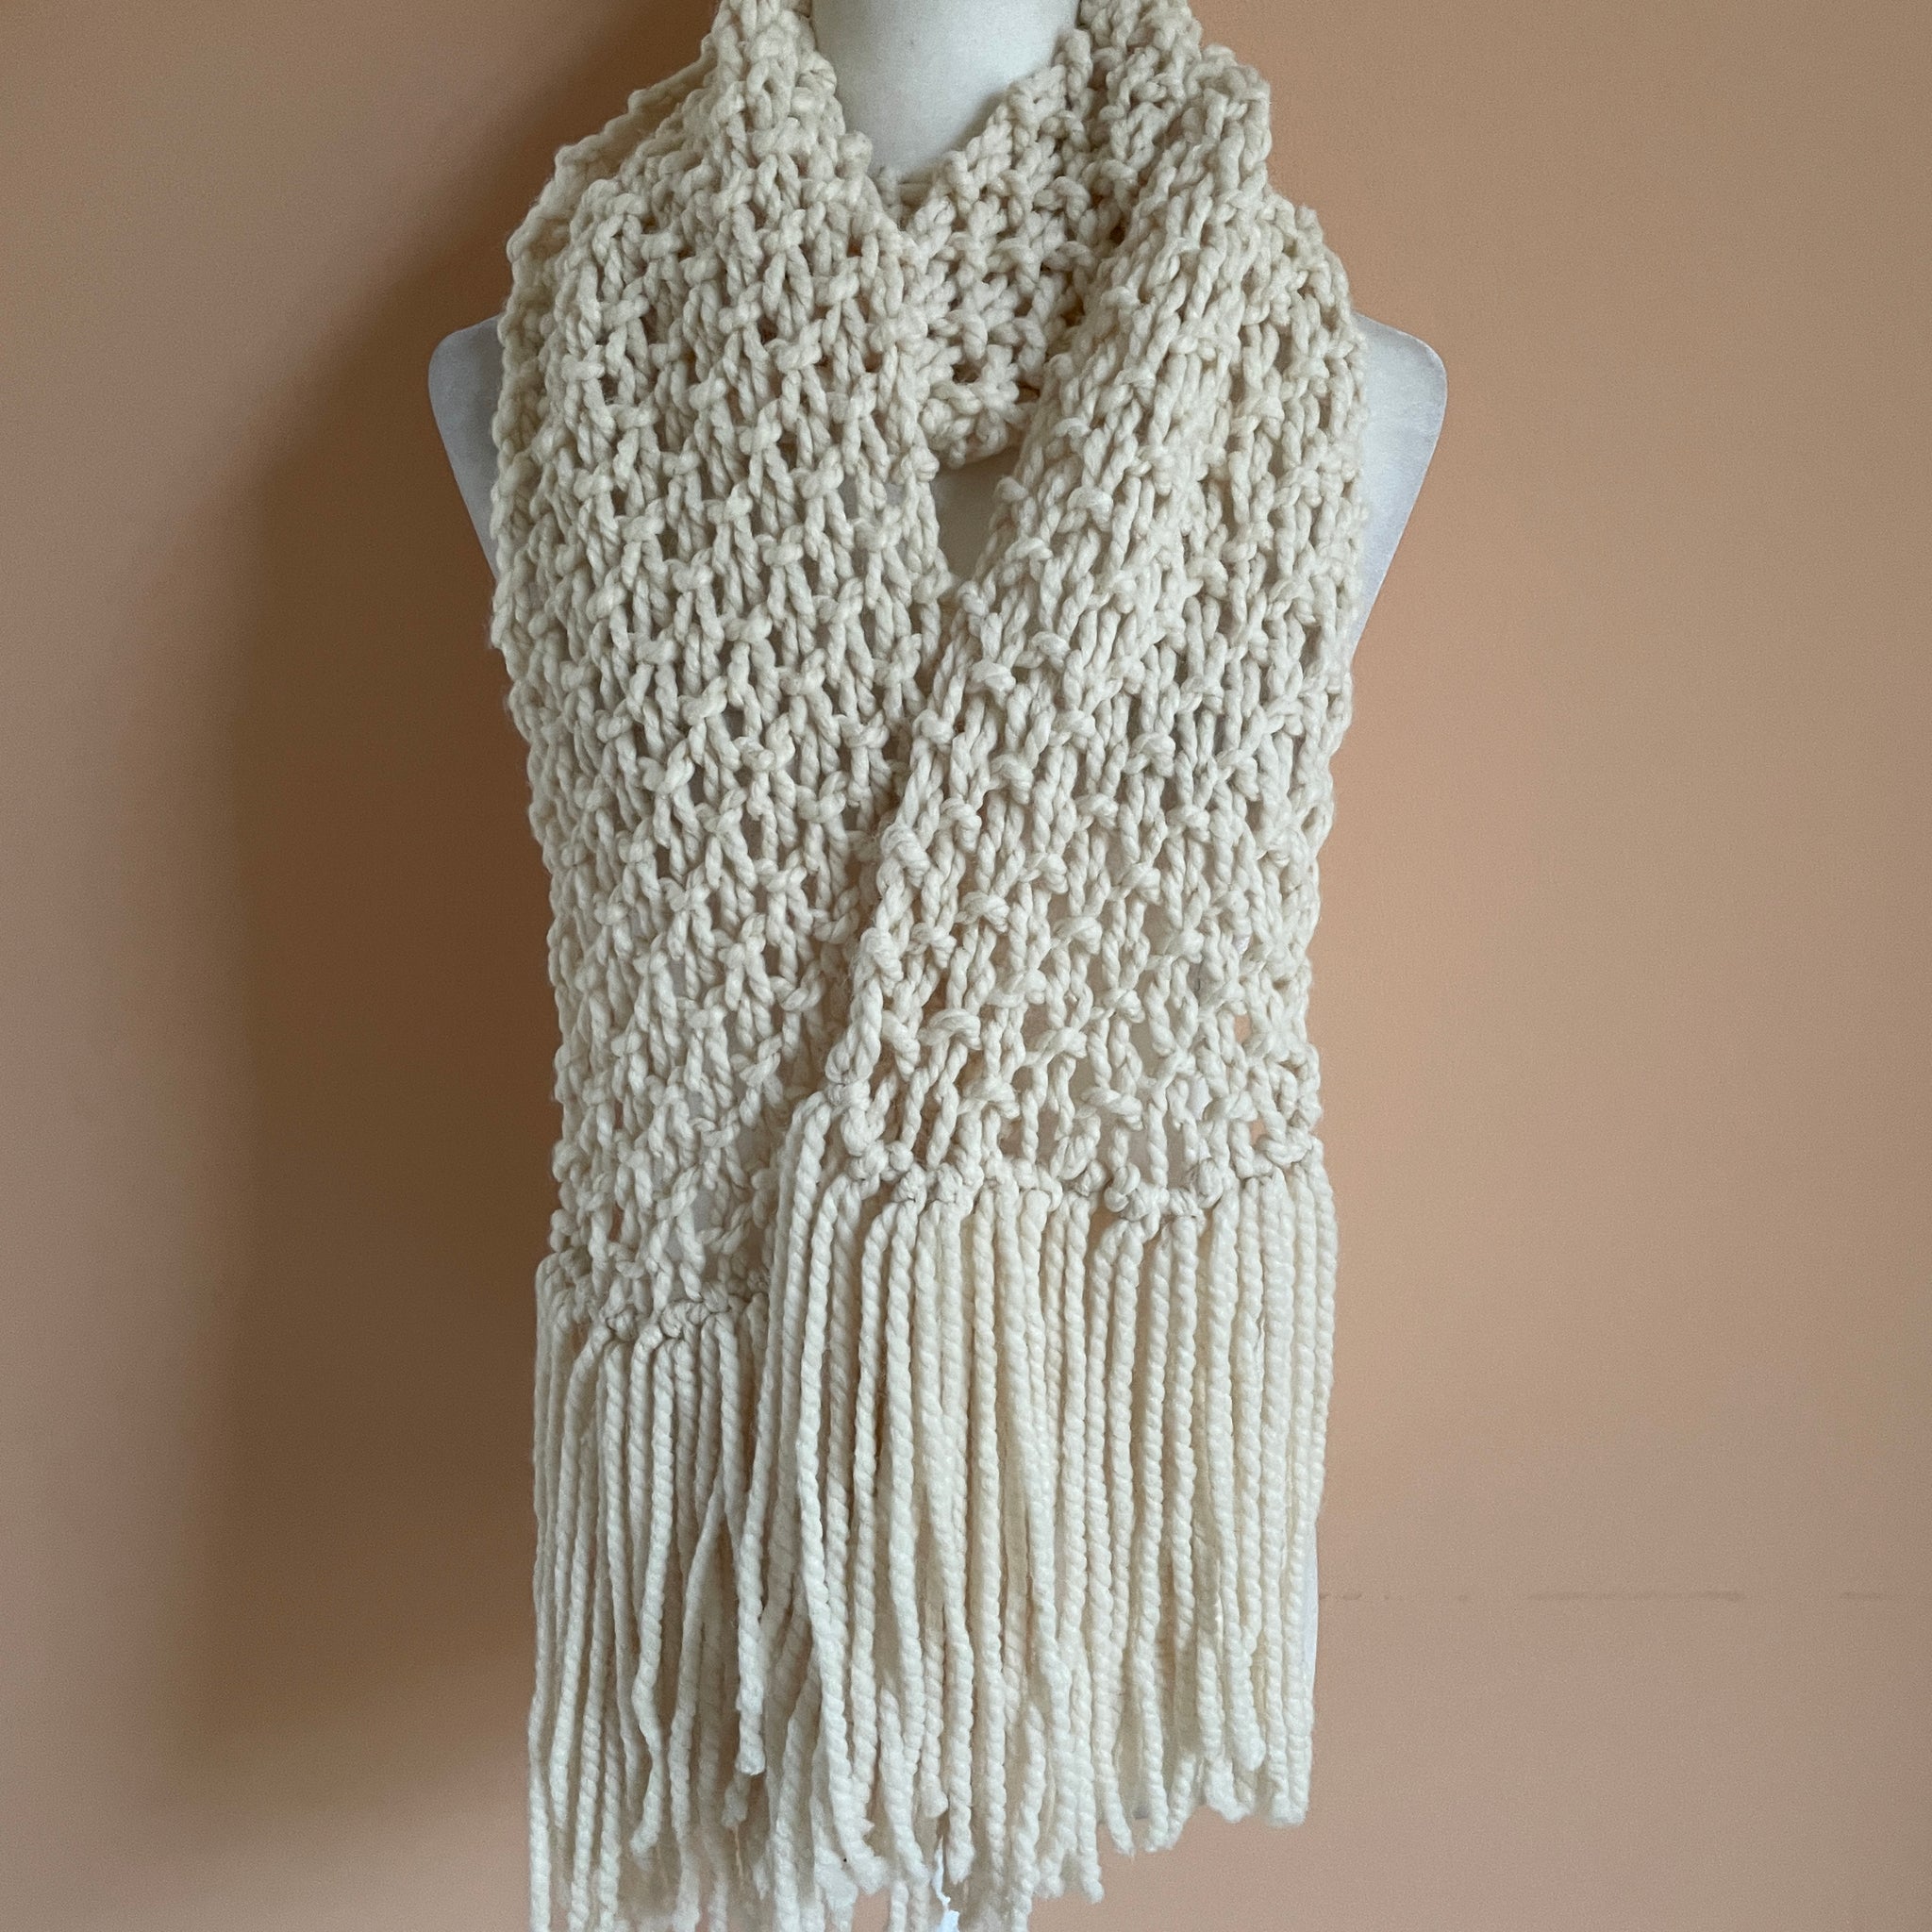 2000s hand knit winter scarf